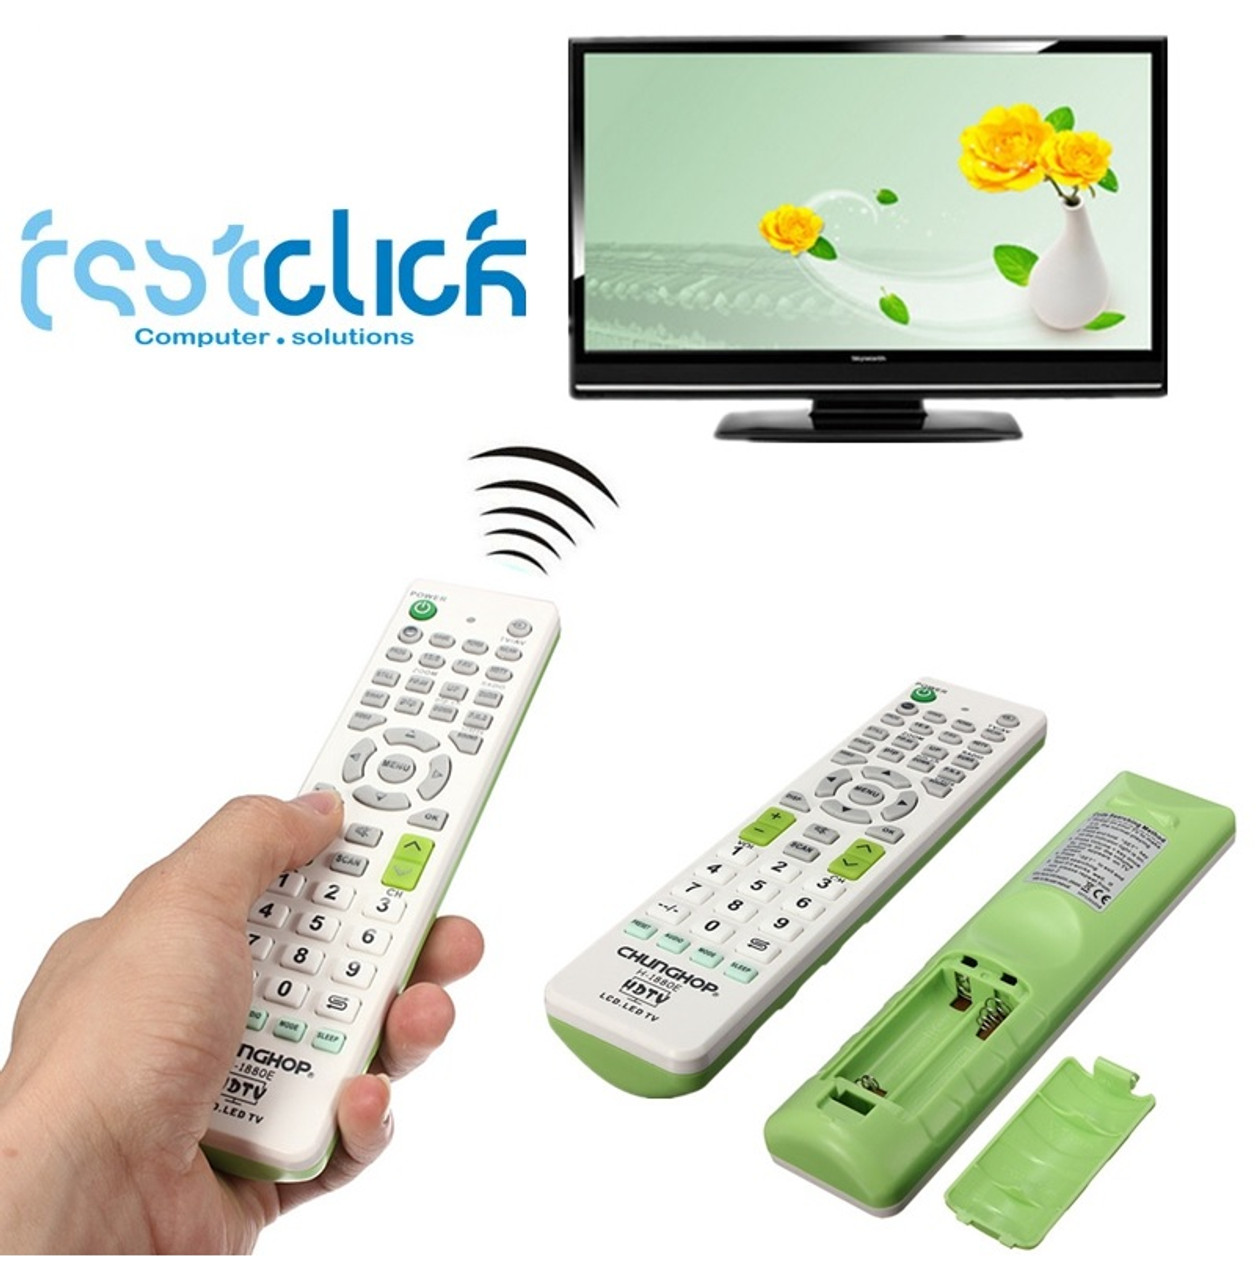 universal remote for led tv